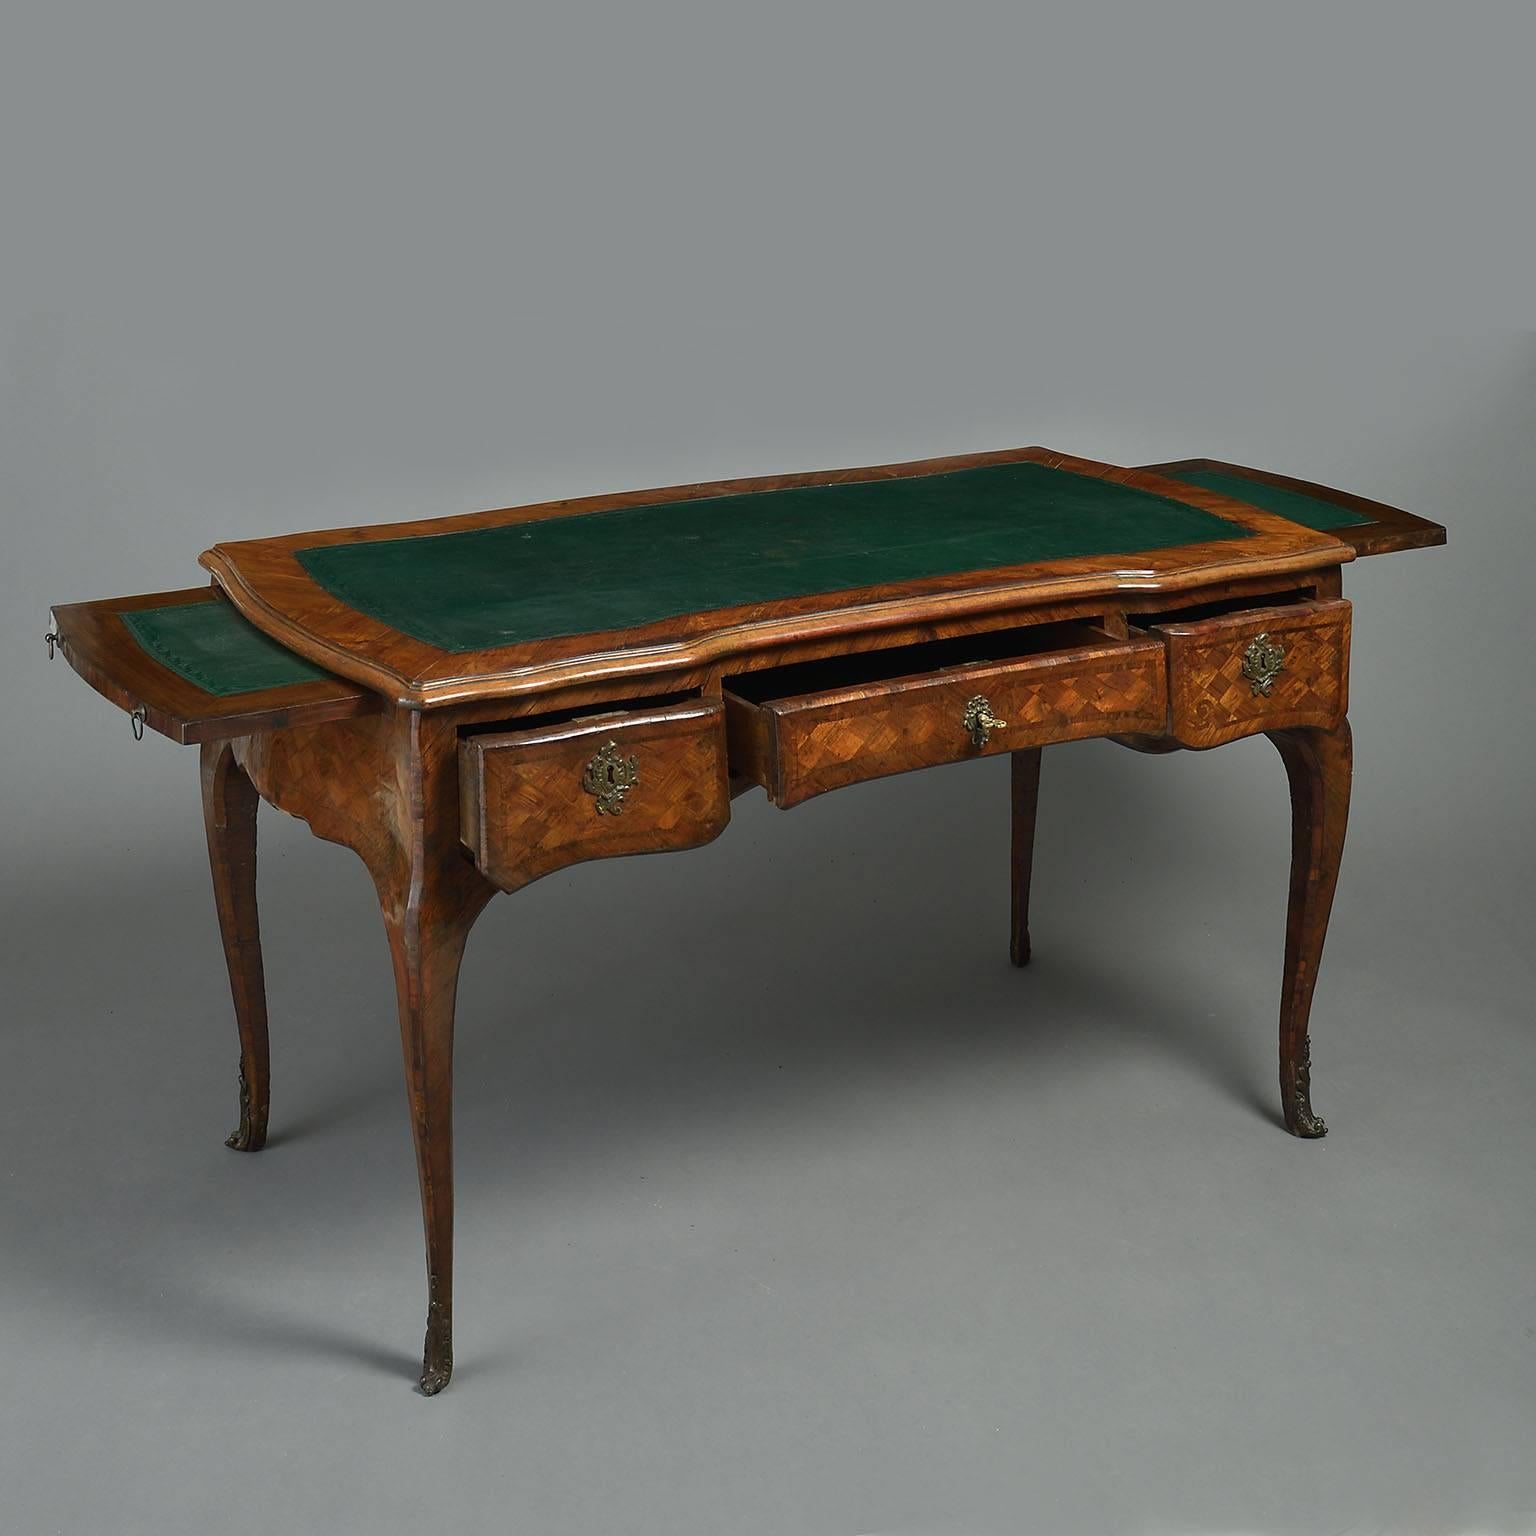 Louis XV 18th Century Kingwood and Tulipwood Parquetry Serpentine Bureau-Plat For Sale